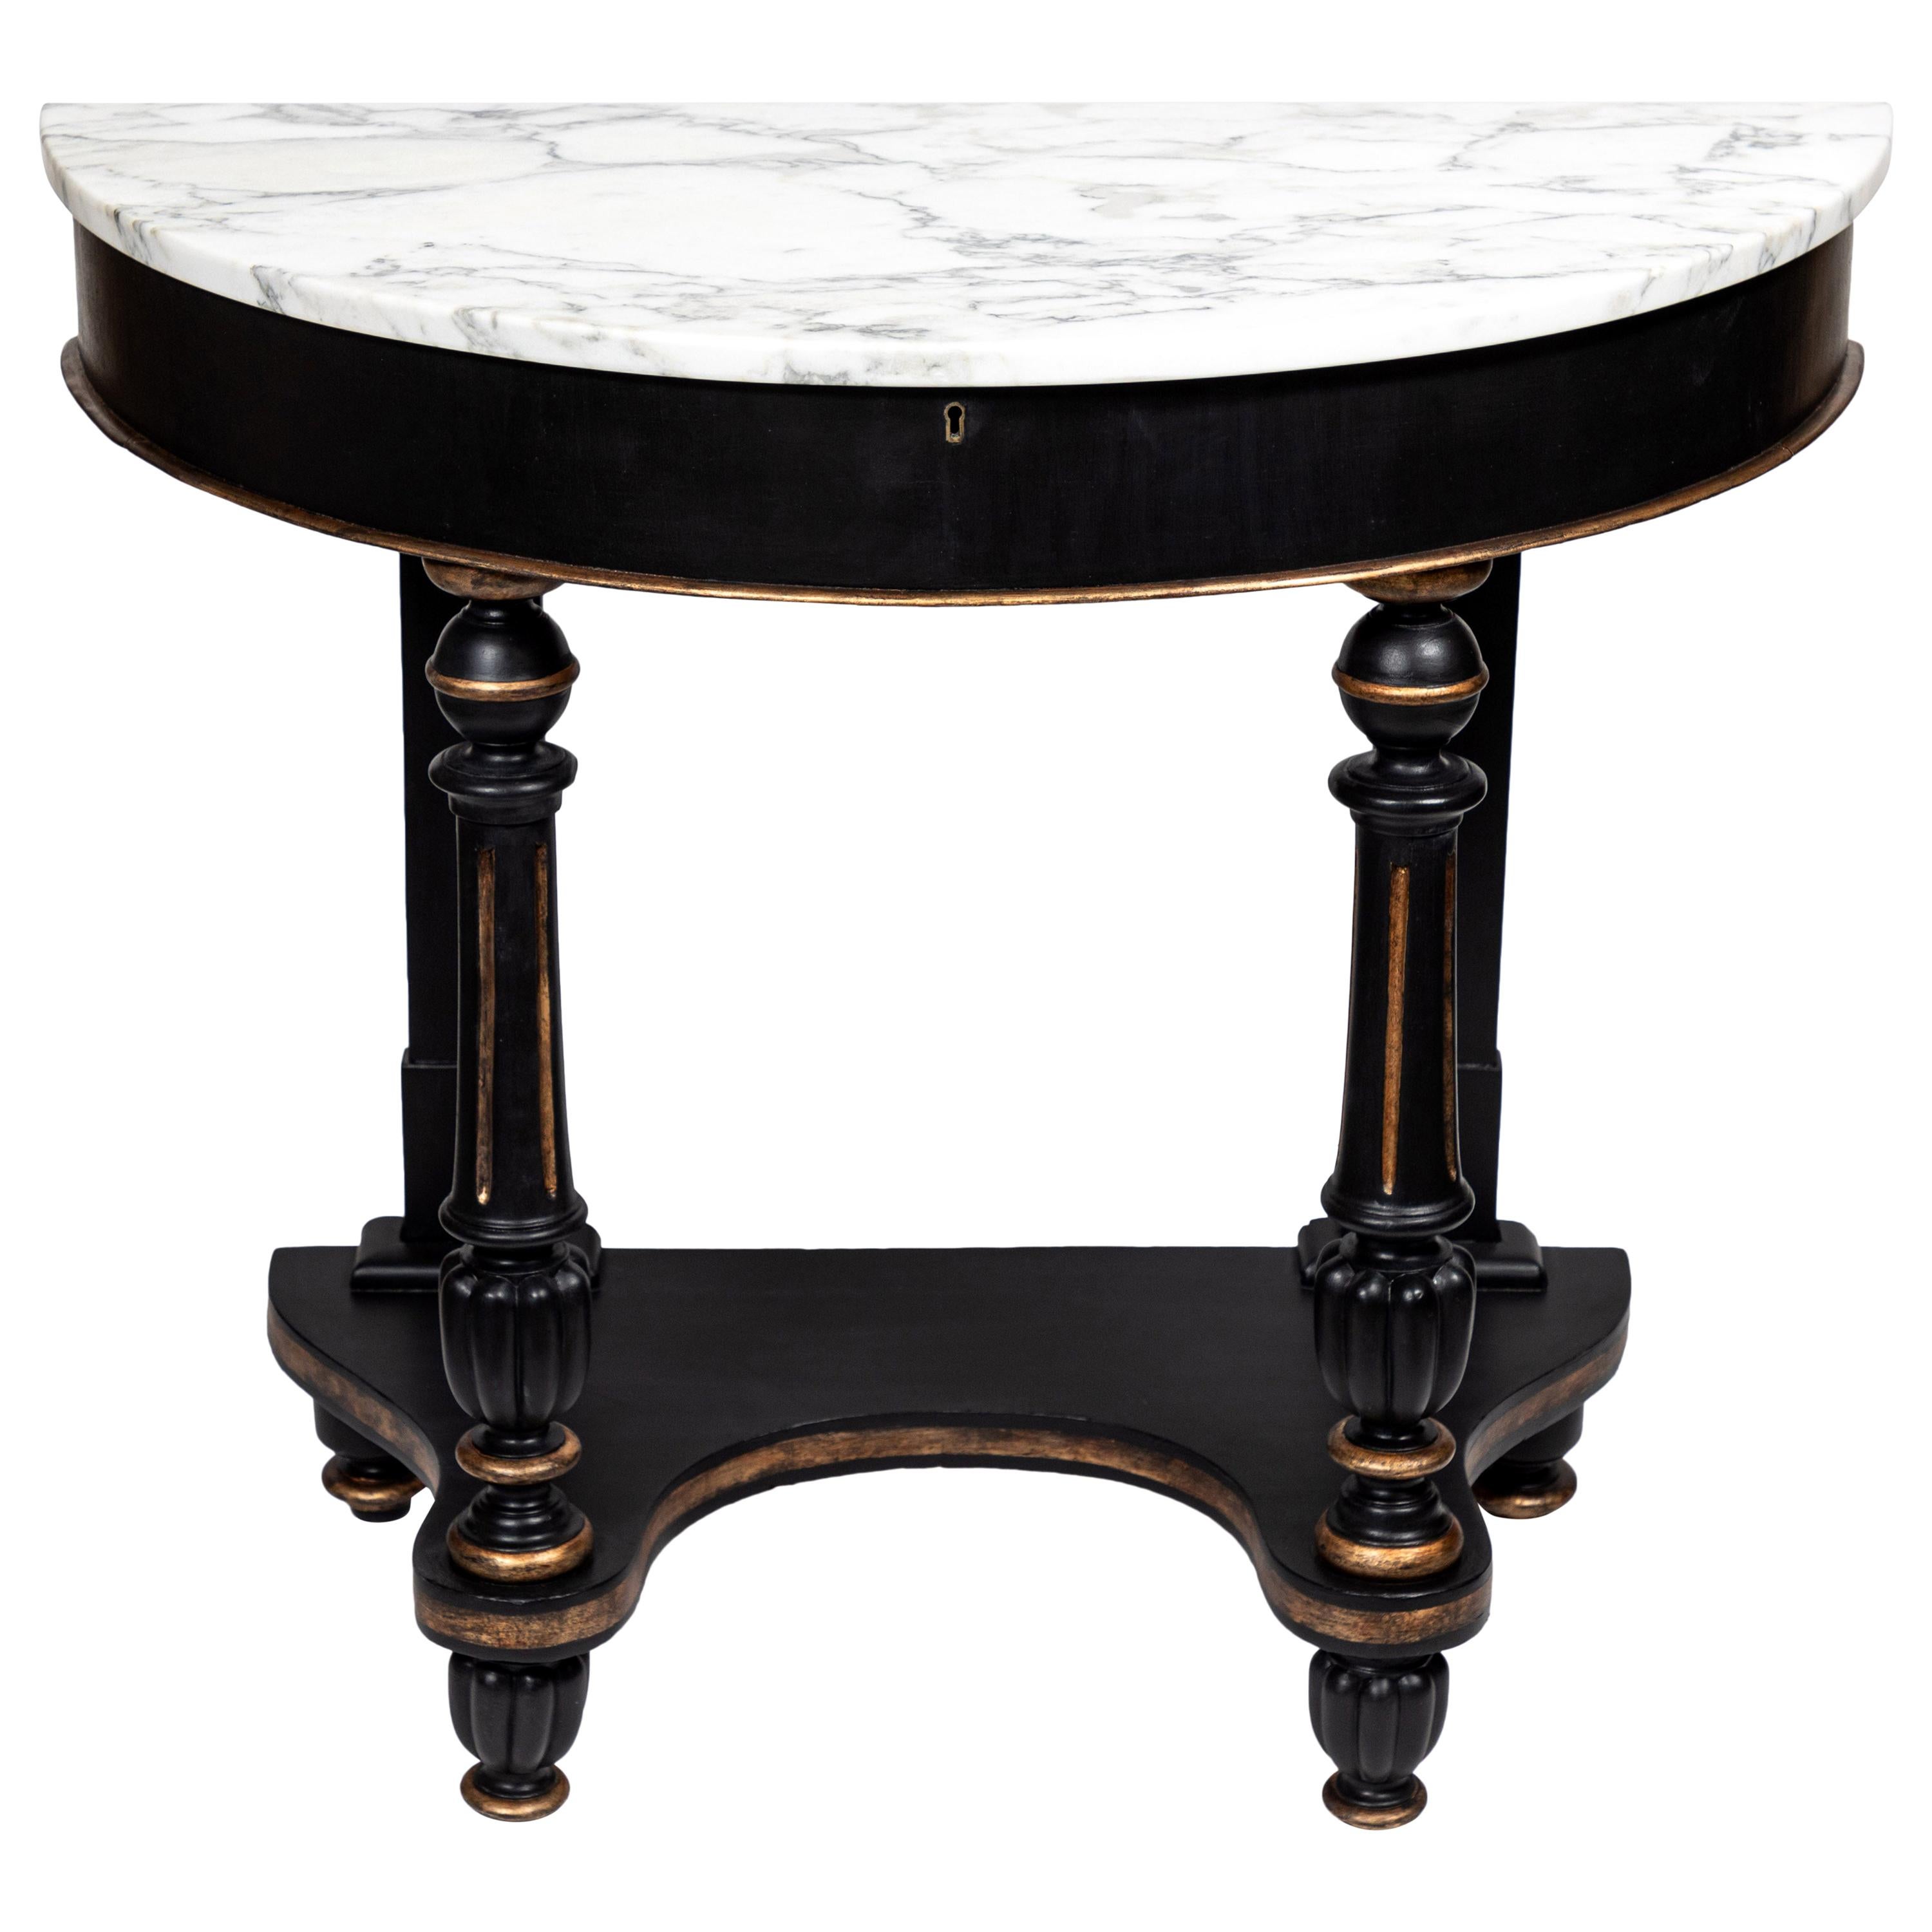 Antique Mahogany Demilune Console Table with New Carrara Marble Top